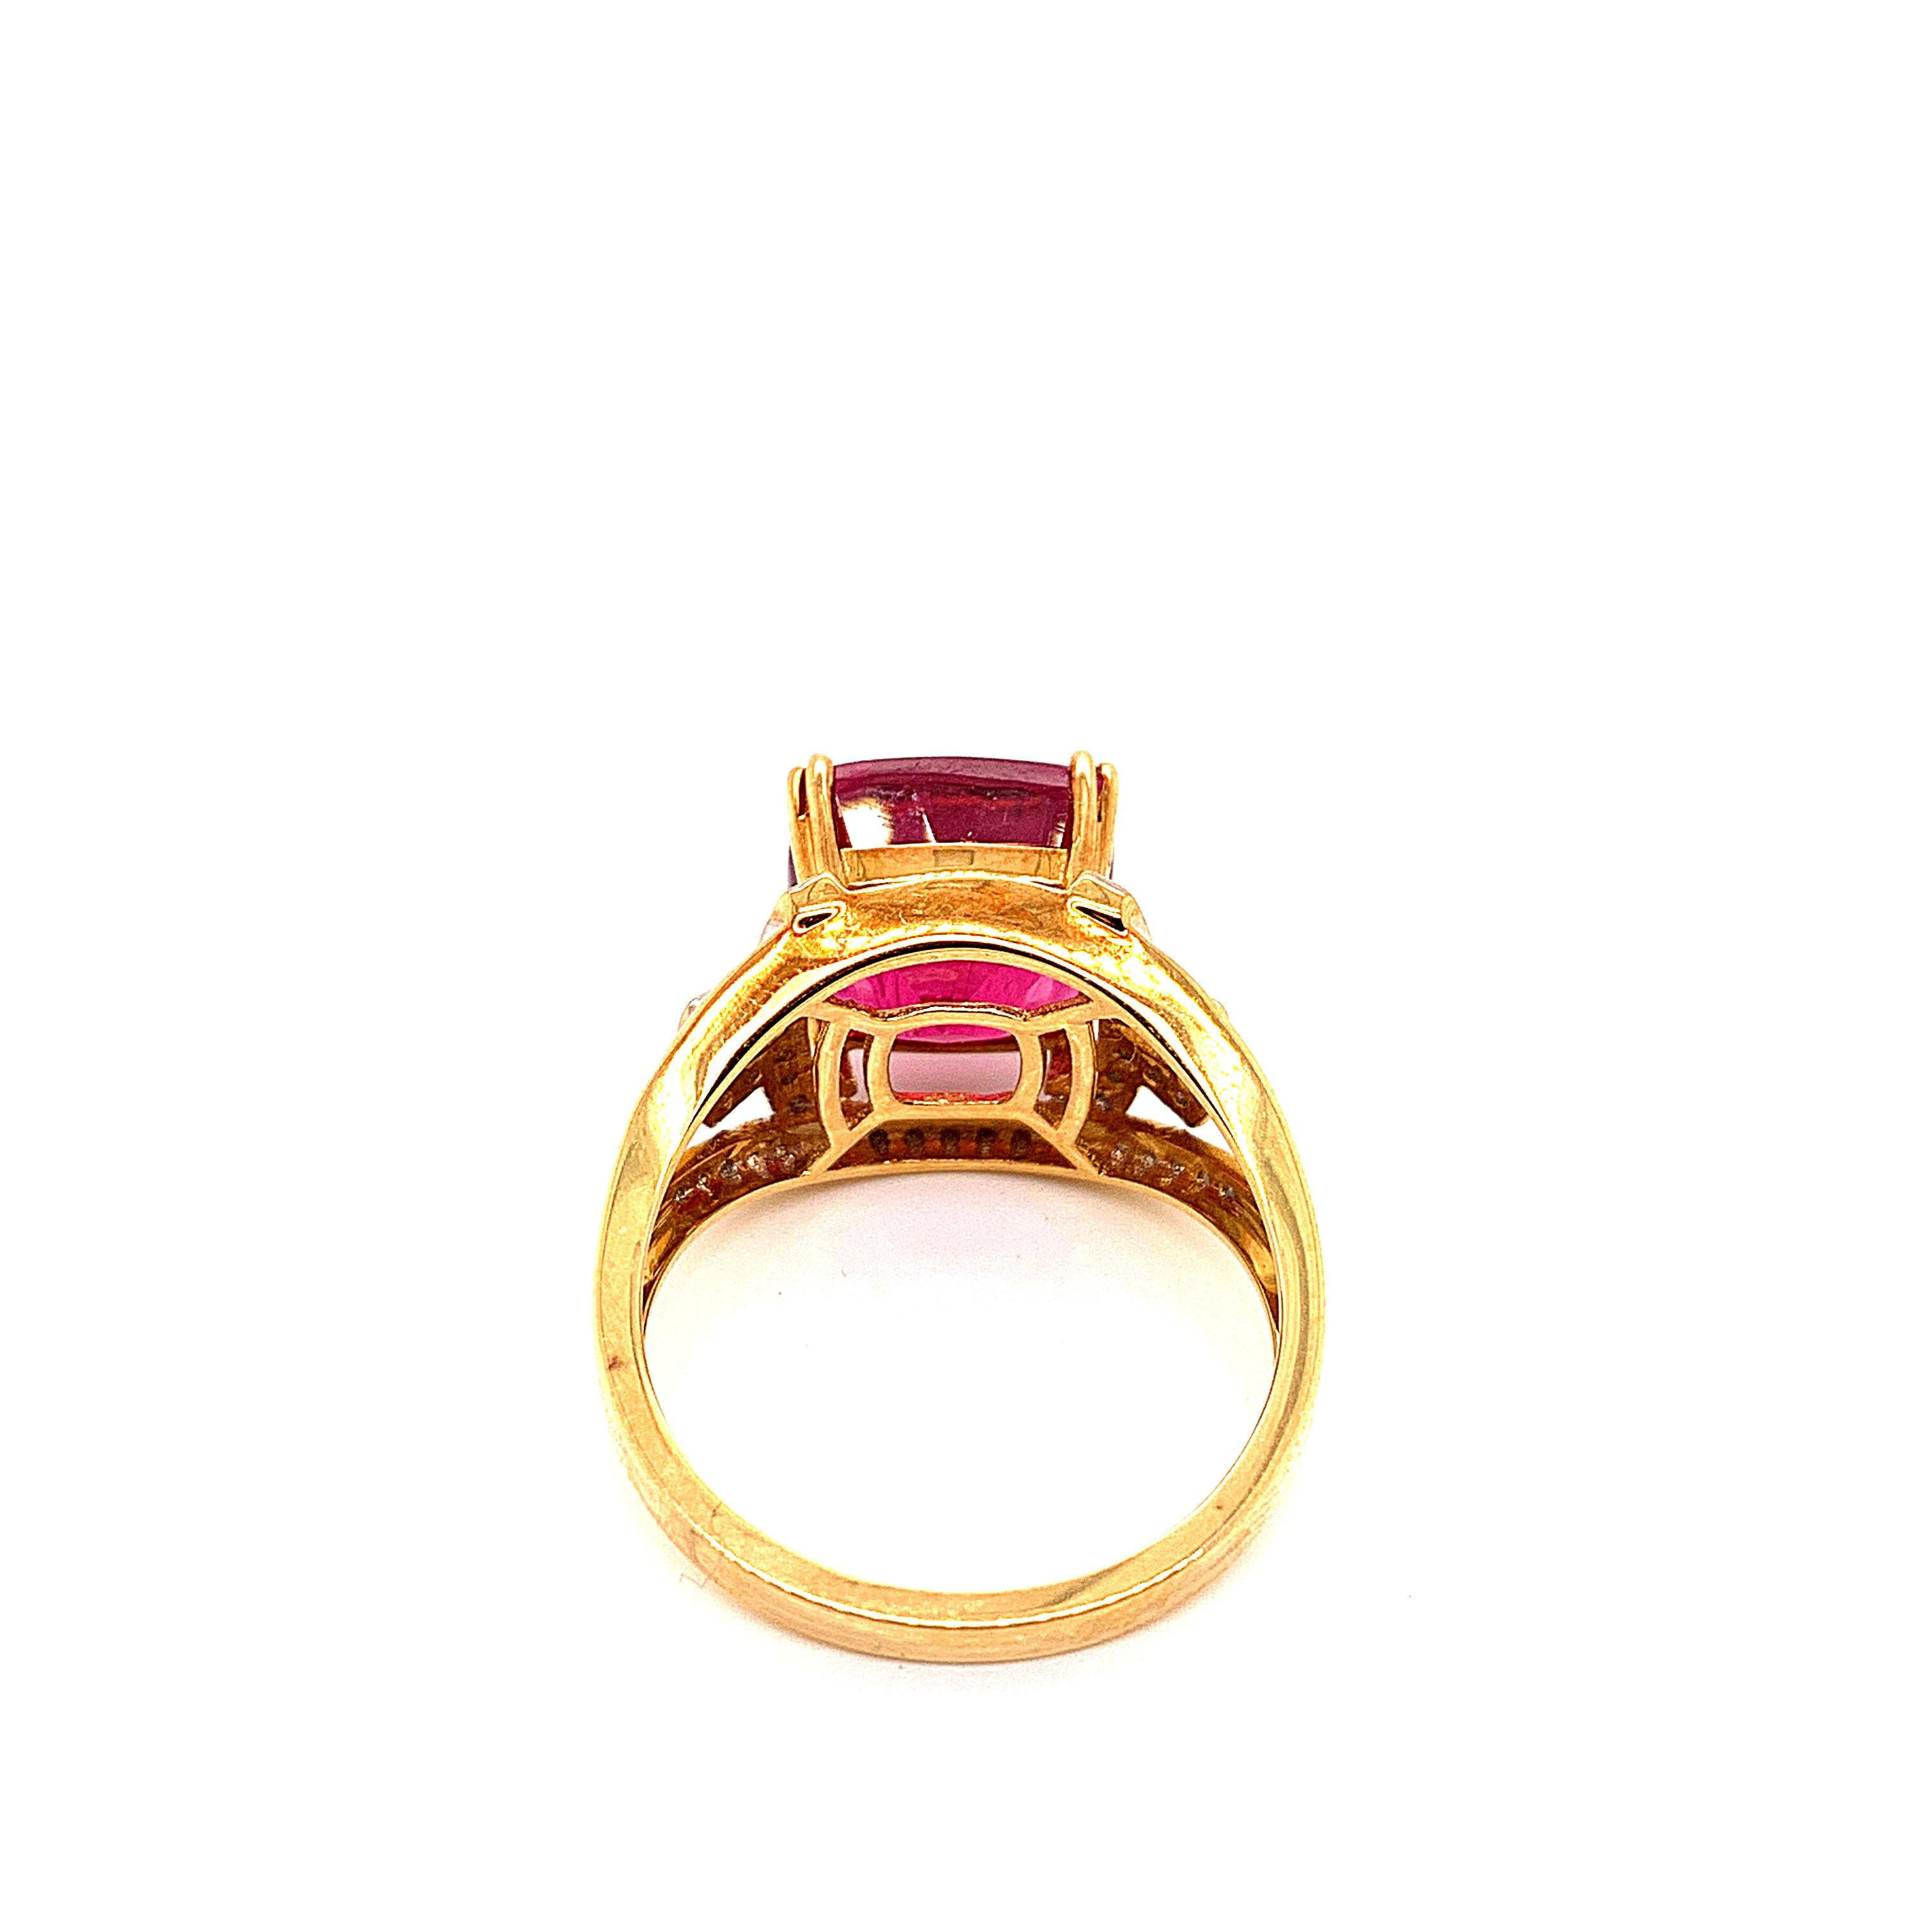 5.72 Carat Cushion Shaped Rubelite Ring in 18 Karat Yellow Gold with Diamonds For Sale 1